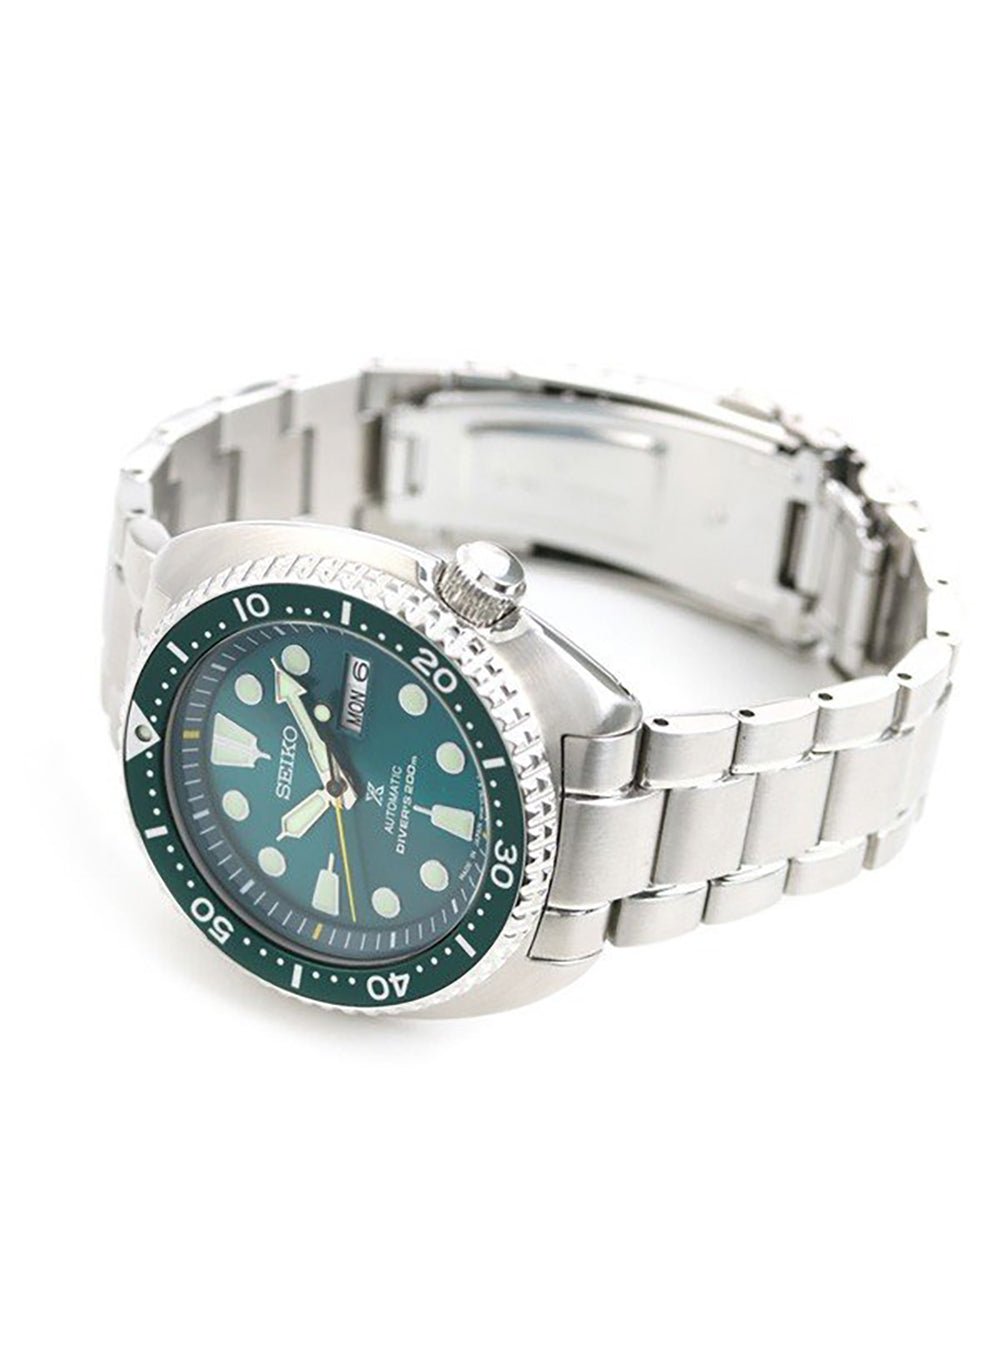 SEIKO PROSPEX TURTLE SBDY039 ONLINE LIMITED MODEL MADE IN JAPAN JDMWRISTWATCHjapan-select